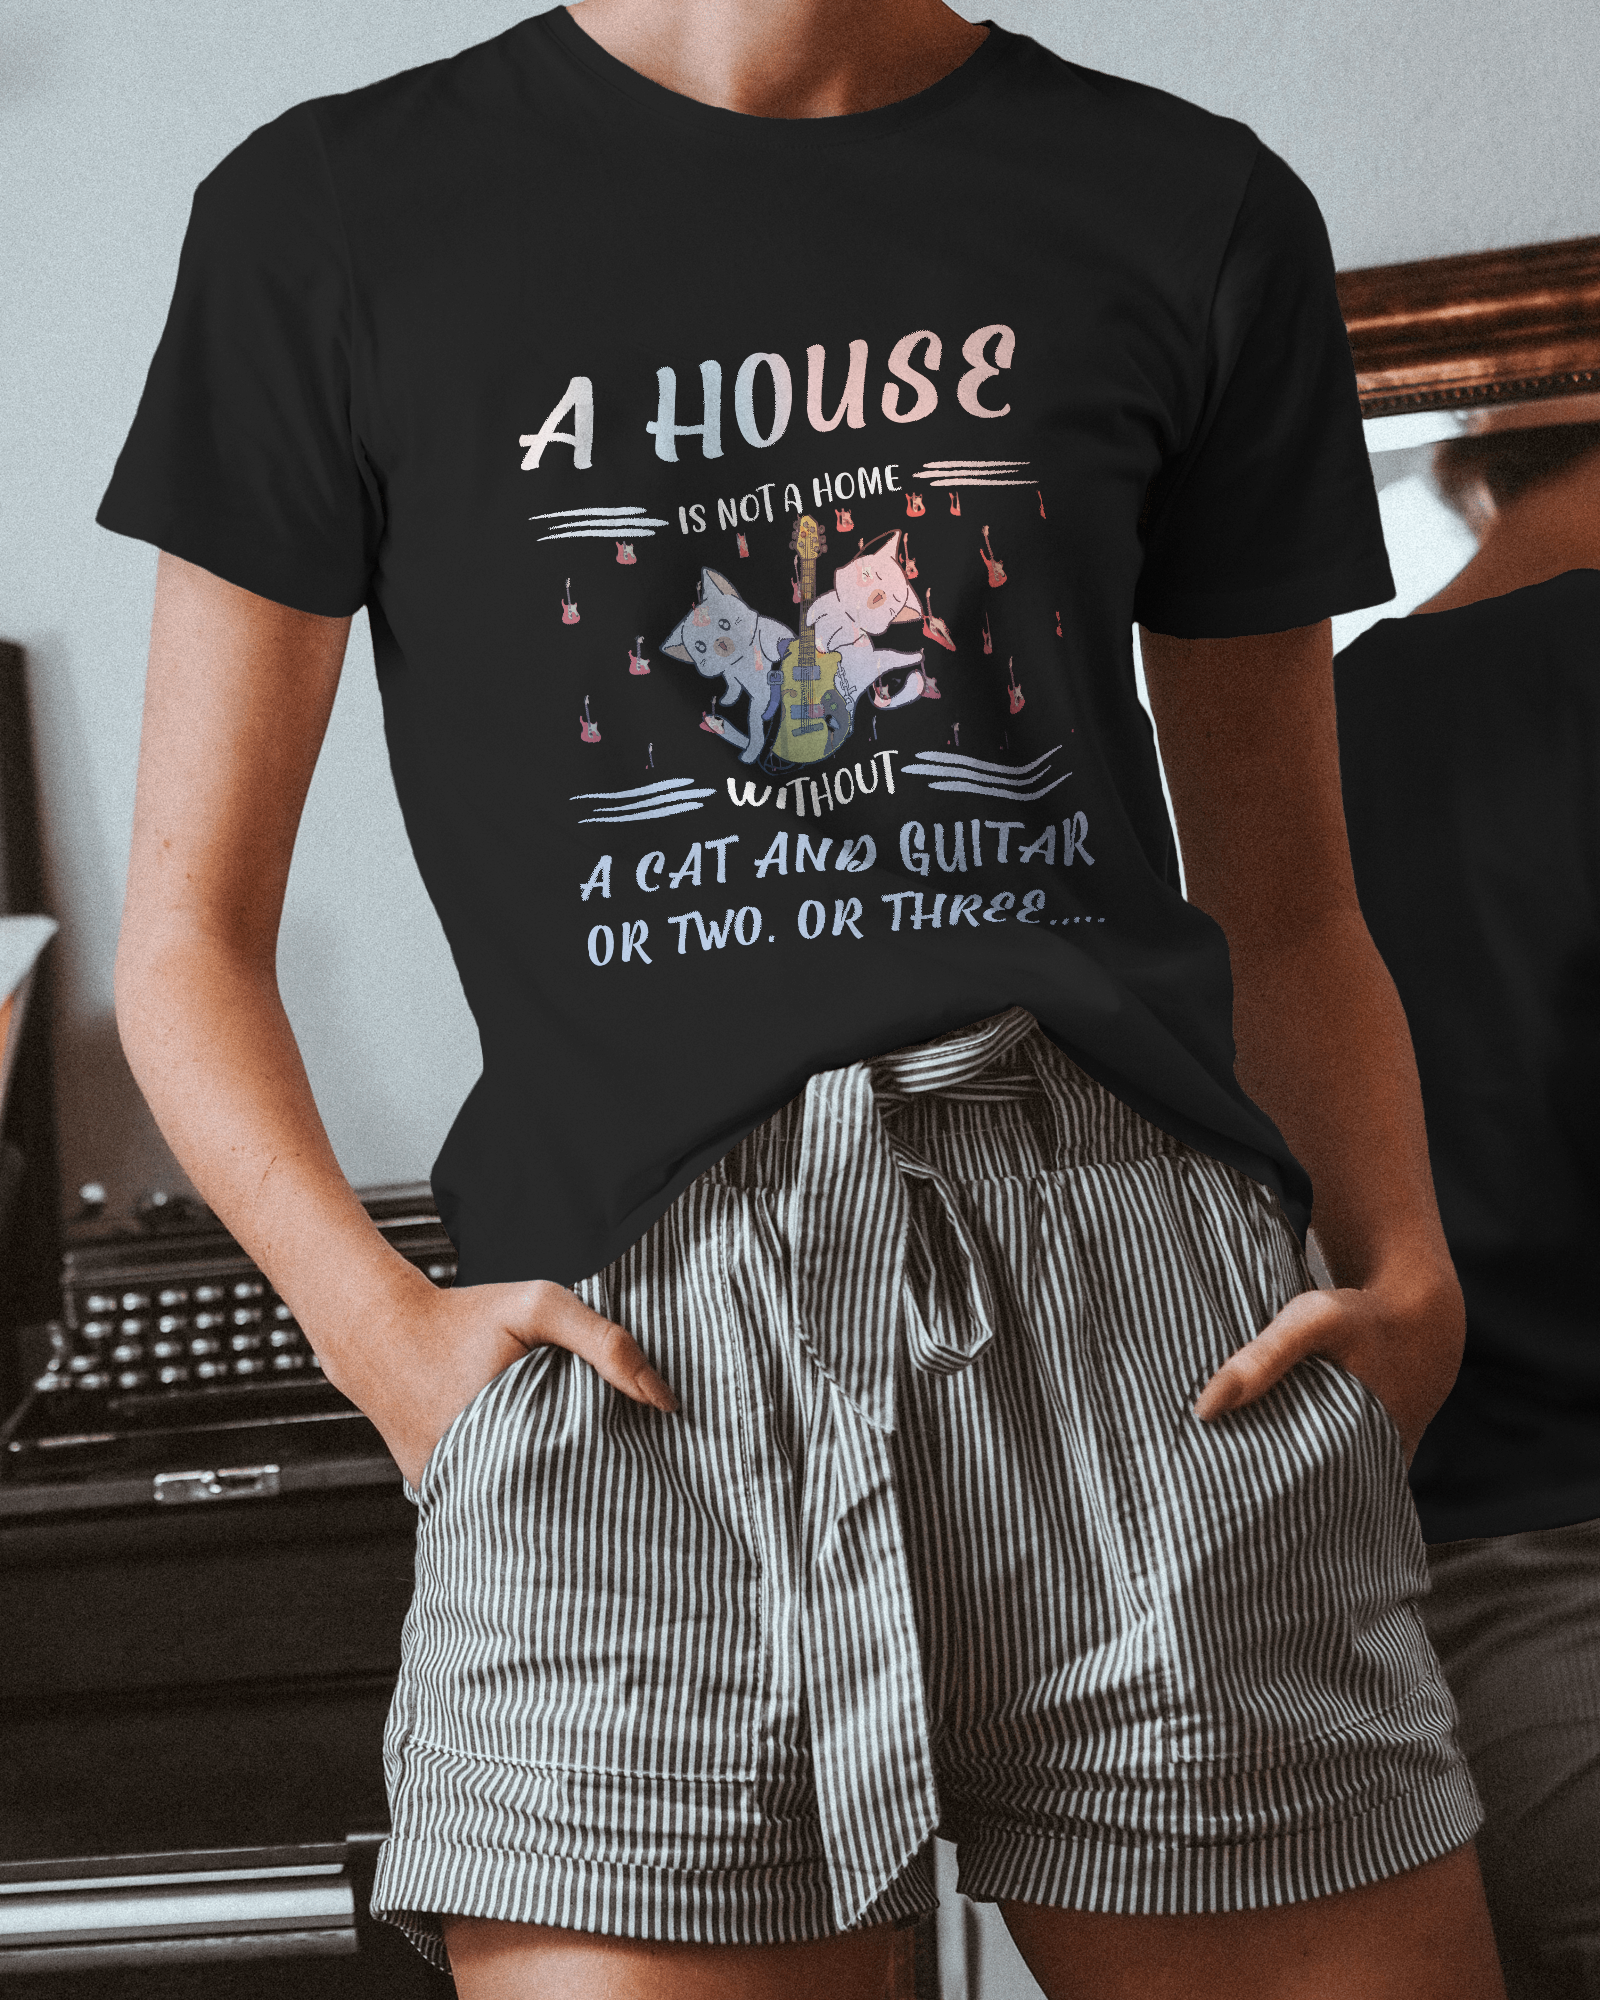 A House Is Not Home Without A Cat and Guitar Unisex Pitch Black T-Shirt